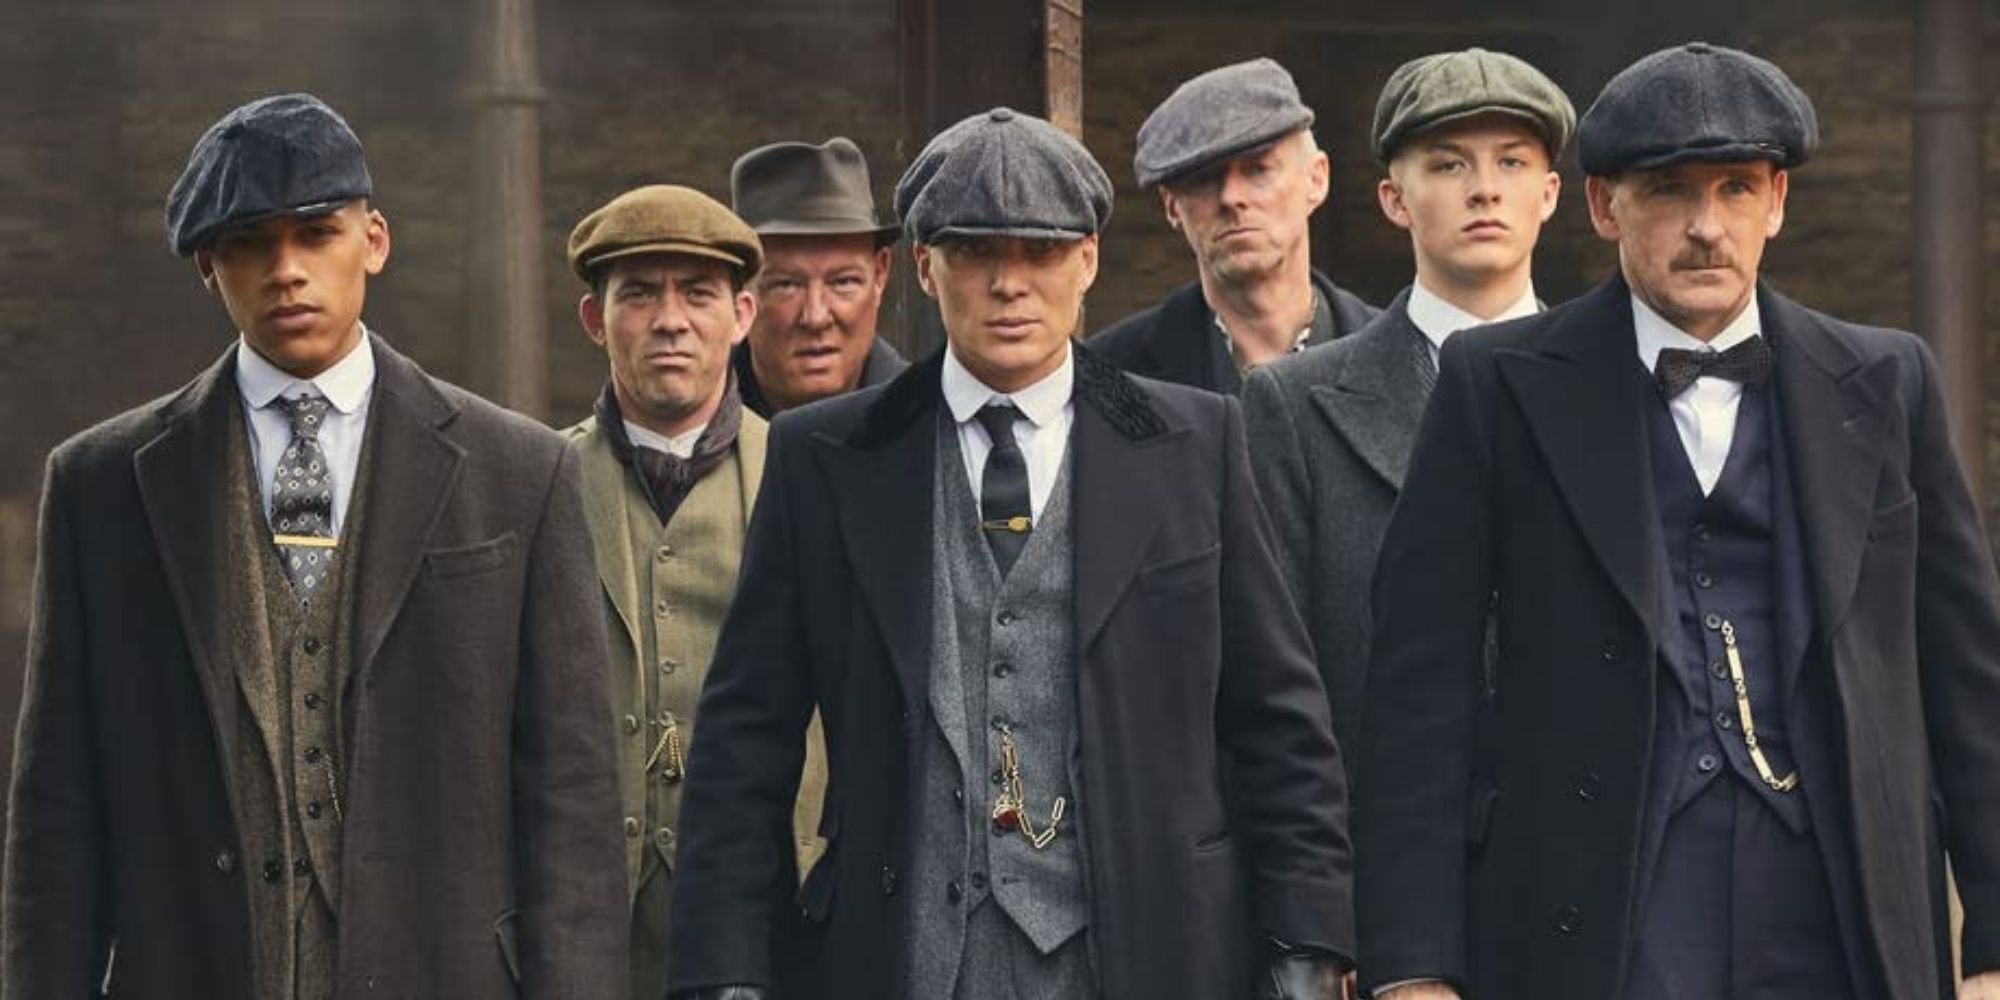 Peaky Blinders Cast Including Thomas Shelby, Arthur Shelby, Johnny Dogs, Charlie, and Finn